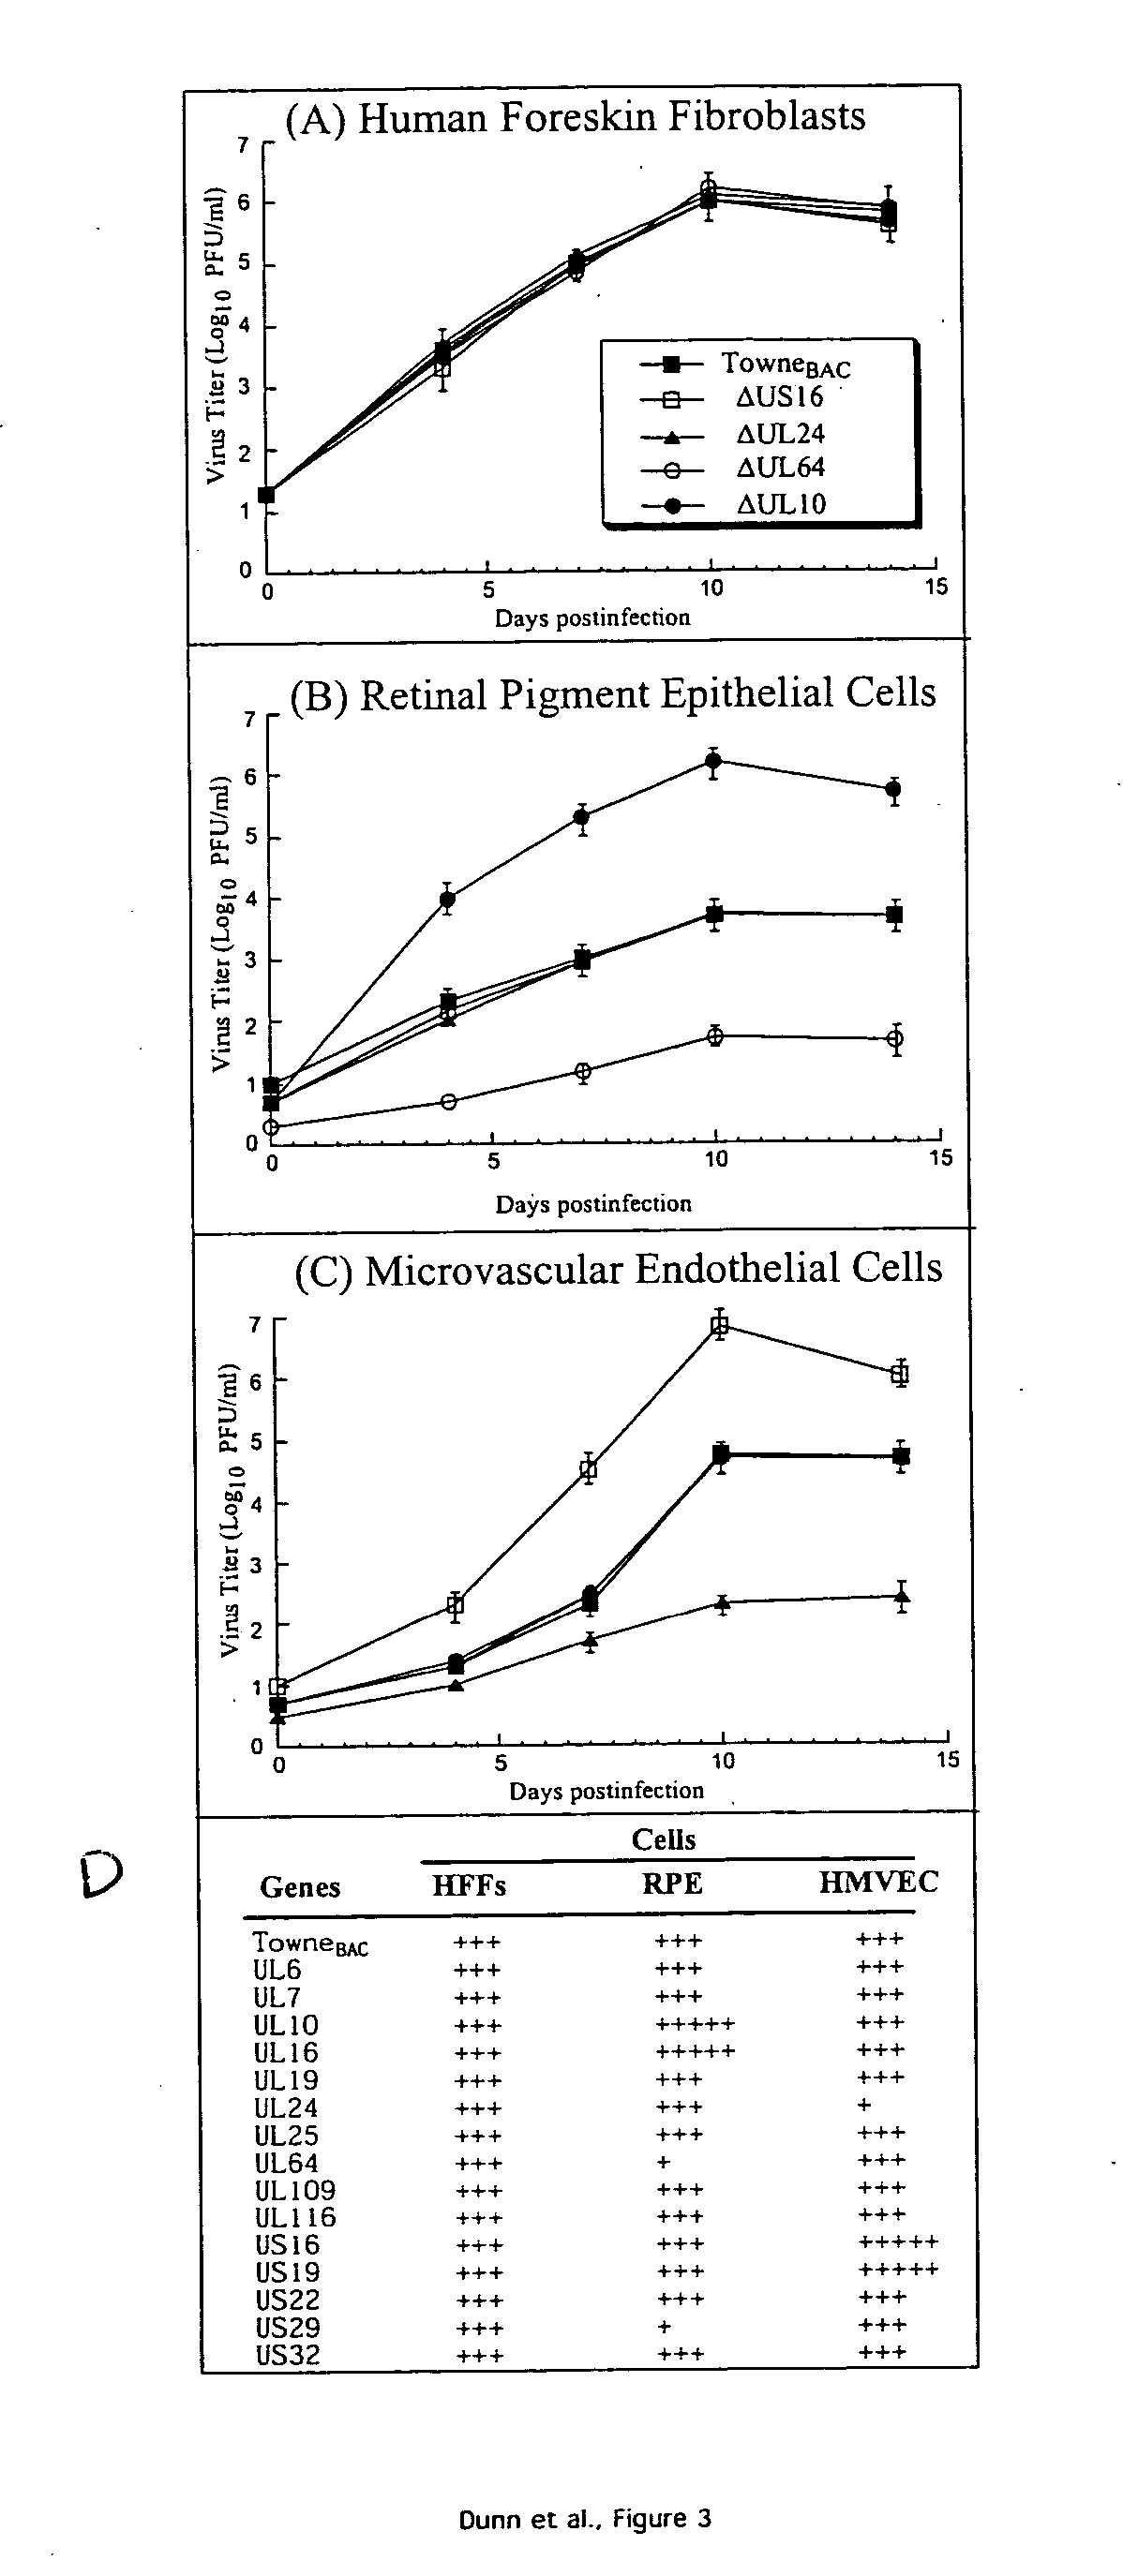 Cytomegalovirus gene function and methods for developing antivirals, anti-CMV vaccines, and CMV-based vectors